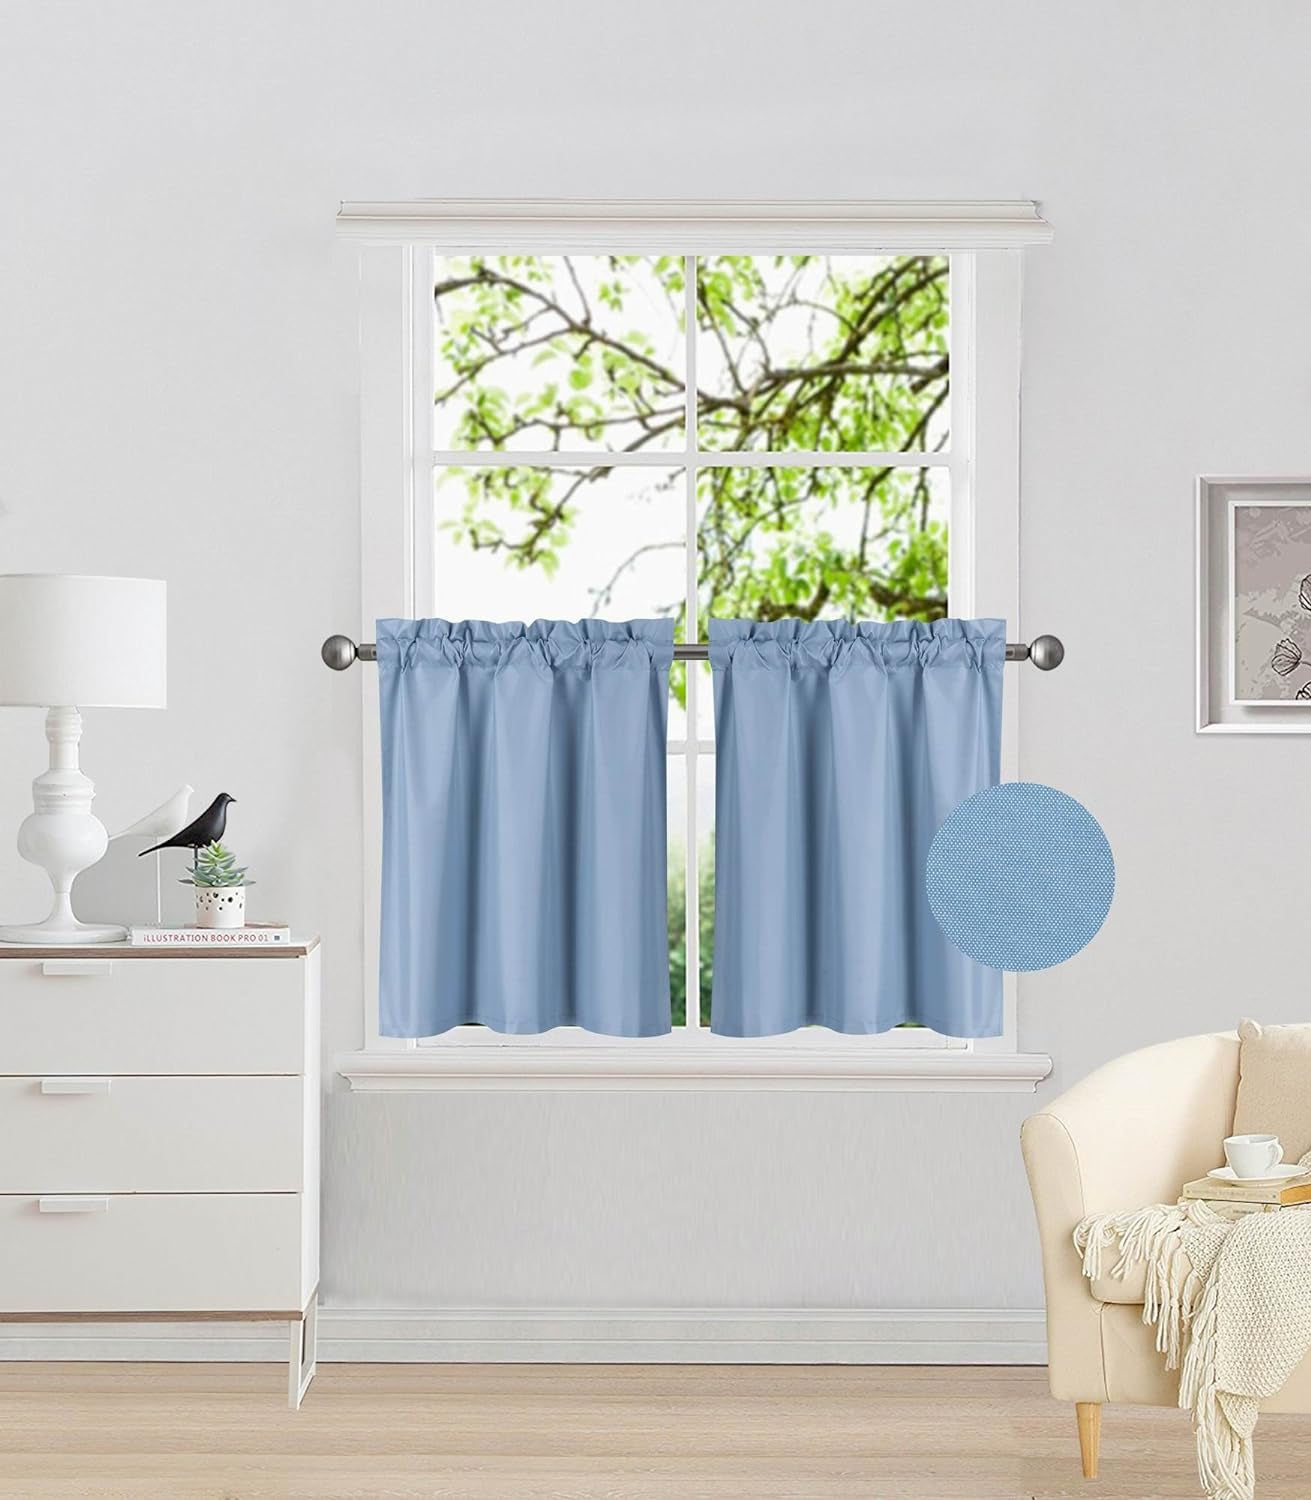 Elegant Home 2 Panels Tiers Small Window Treatment Curtain Insulated Blackout Drape Short Panel 28" W X 24" L Each for Kitchen Bathroom or Any Small Window # R16 (Sage Green)  Elegant Home Decor Light Blue  